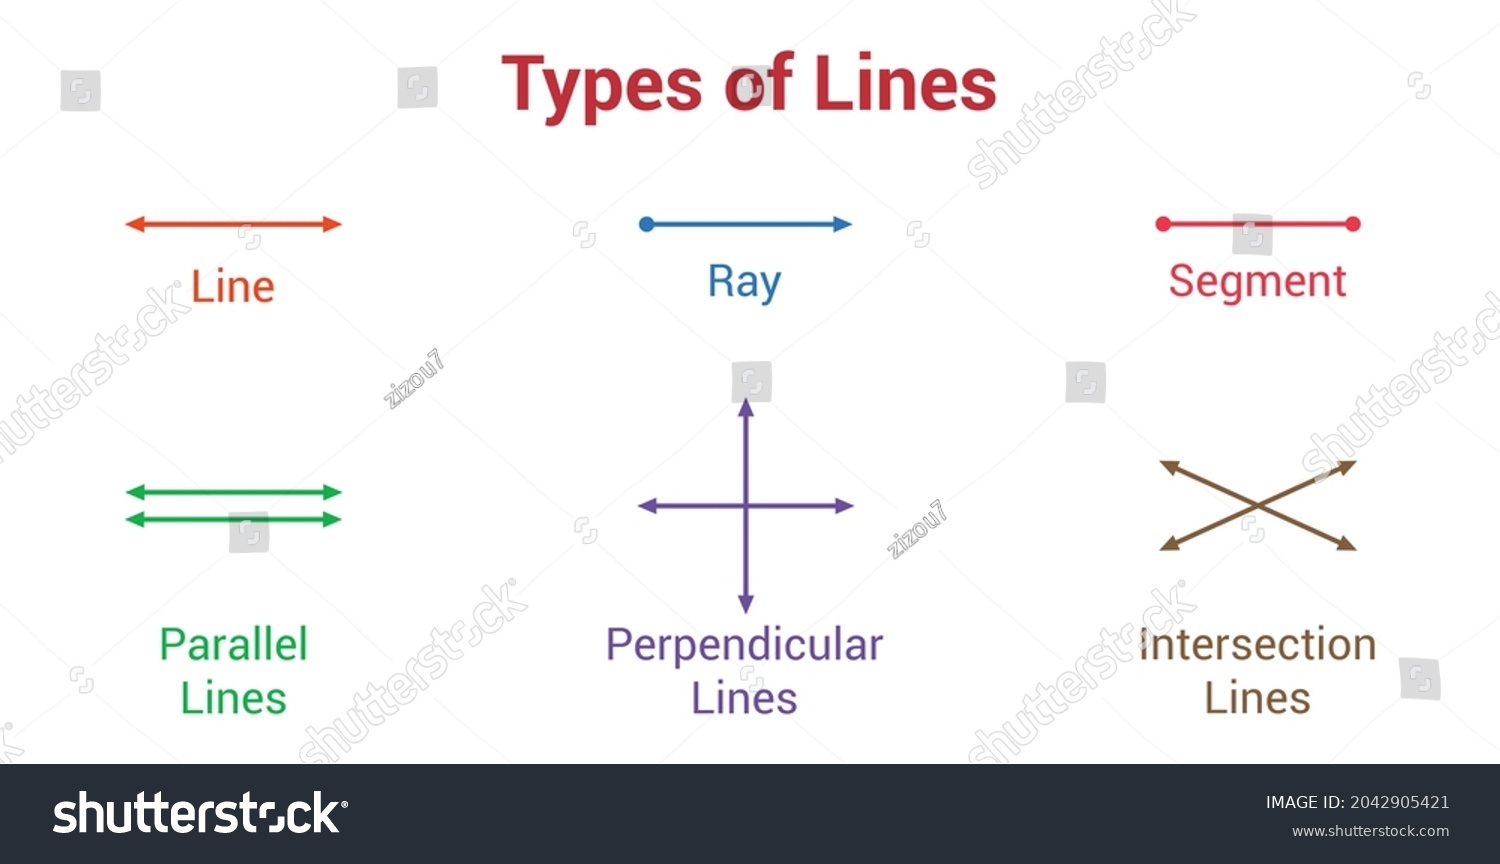 Parallel and Perpendicular Lines - Class 5 - Quizizz